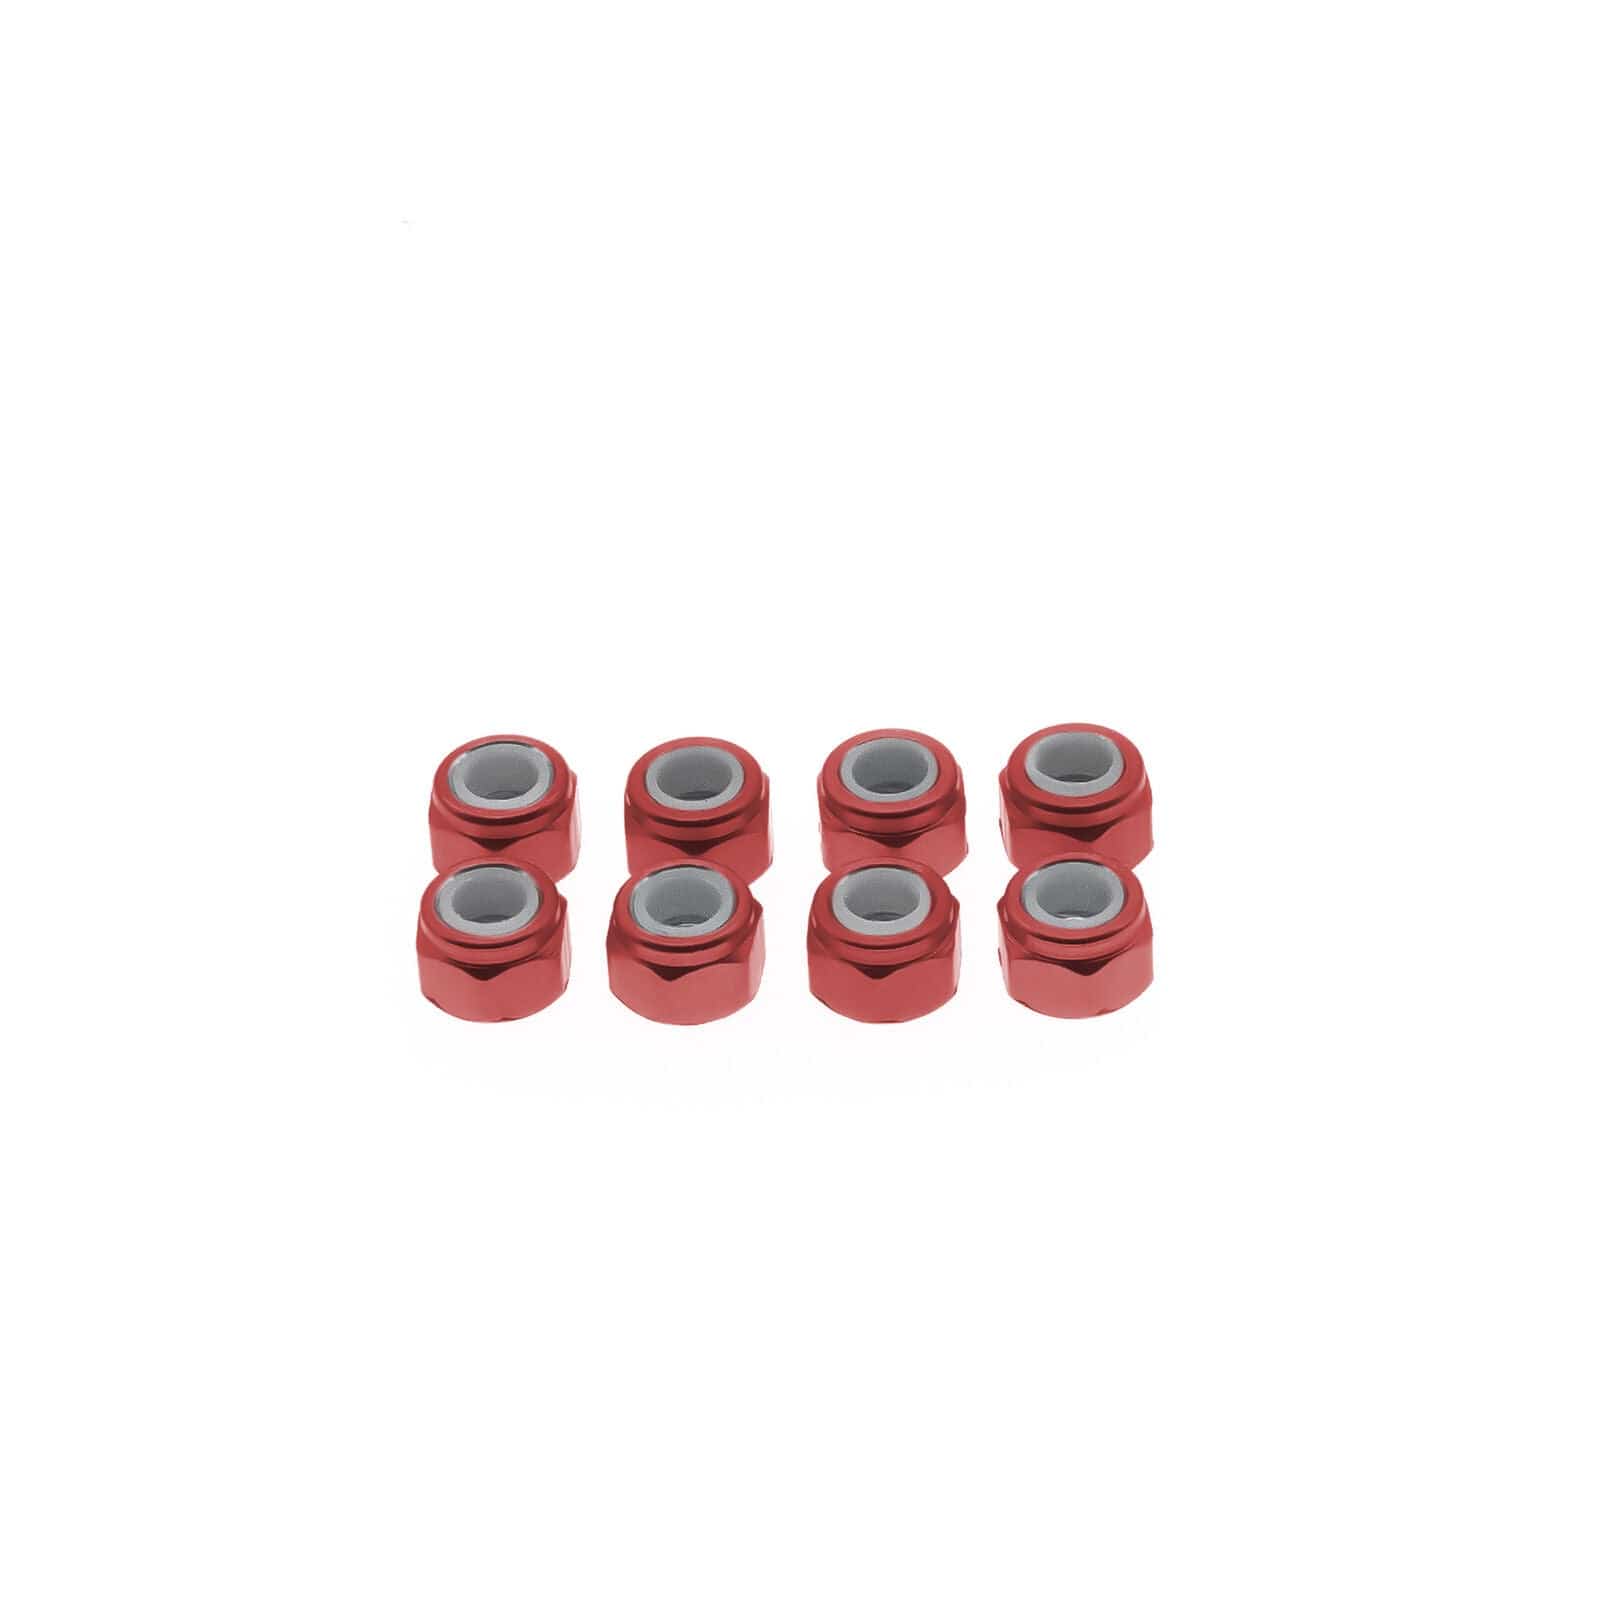 RCAWD ECX UPGRADE PARTS RCAWD M3 Wheel Hex Lock Nut Tire Nut ECX1059 For RC Hobby Car 1-10 ECX 2WD Series 8PCS